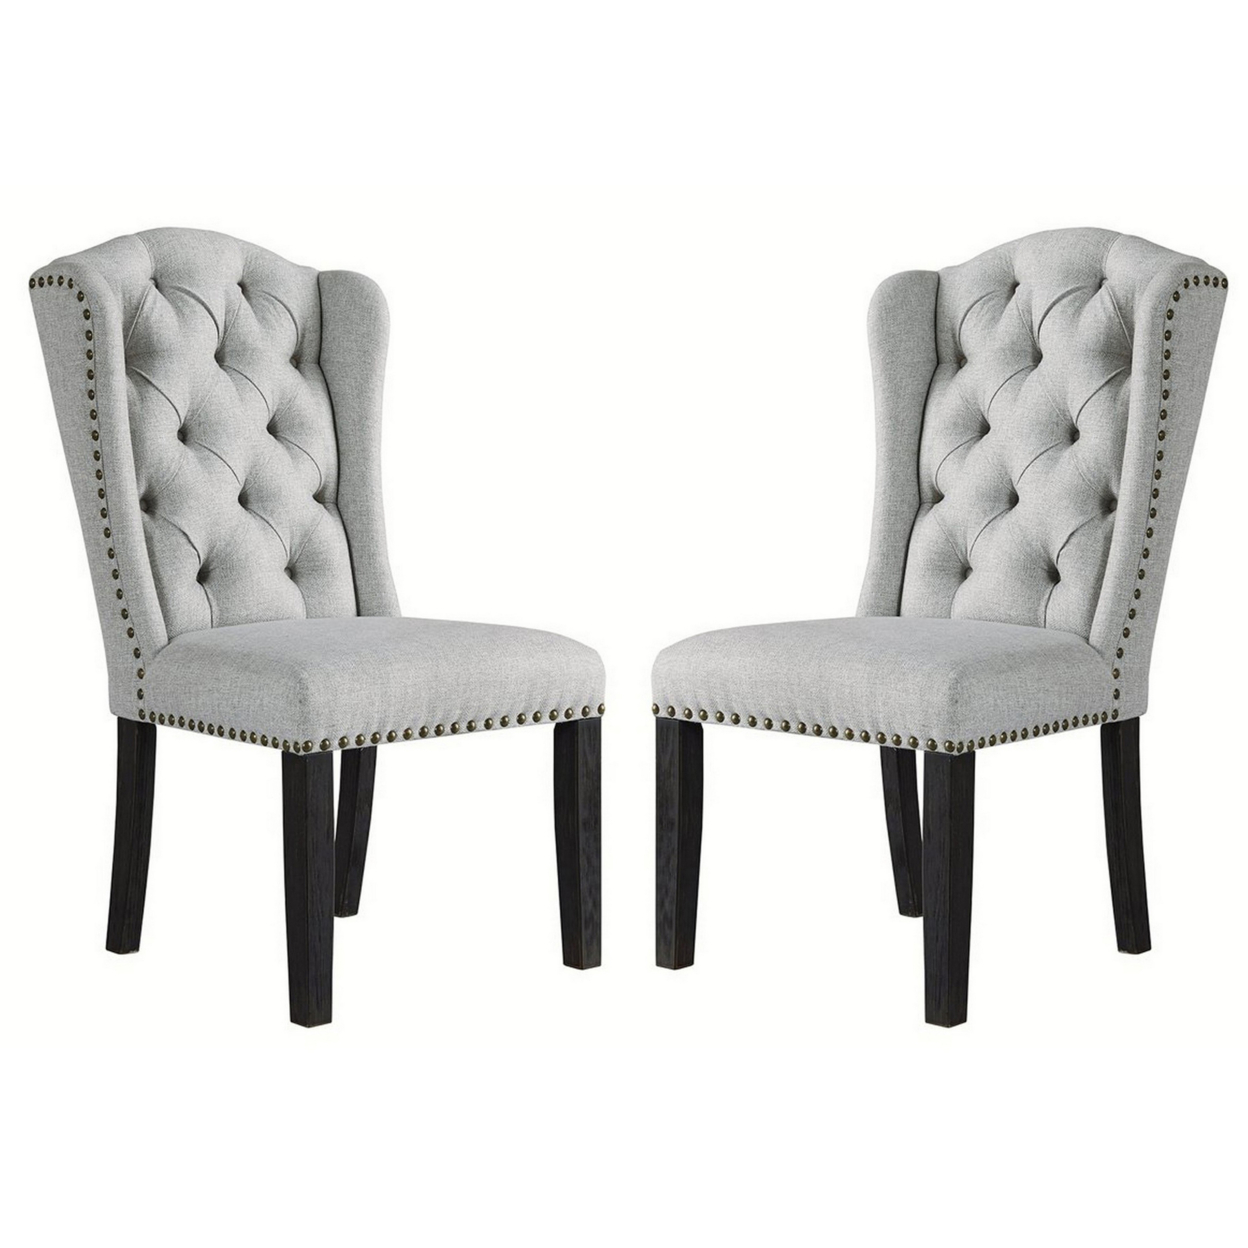 Button Tufted Fabric Upholstered Side Chair With Wooden Legs,Set Of 2, Gray- Saltoro Sherpi